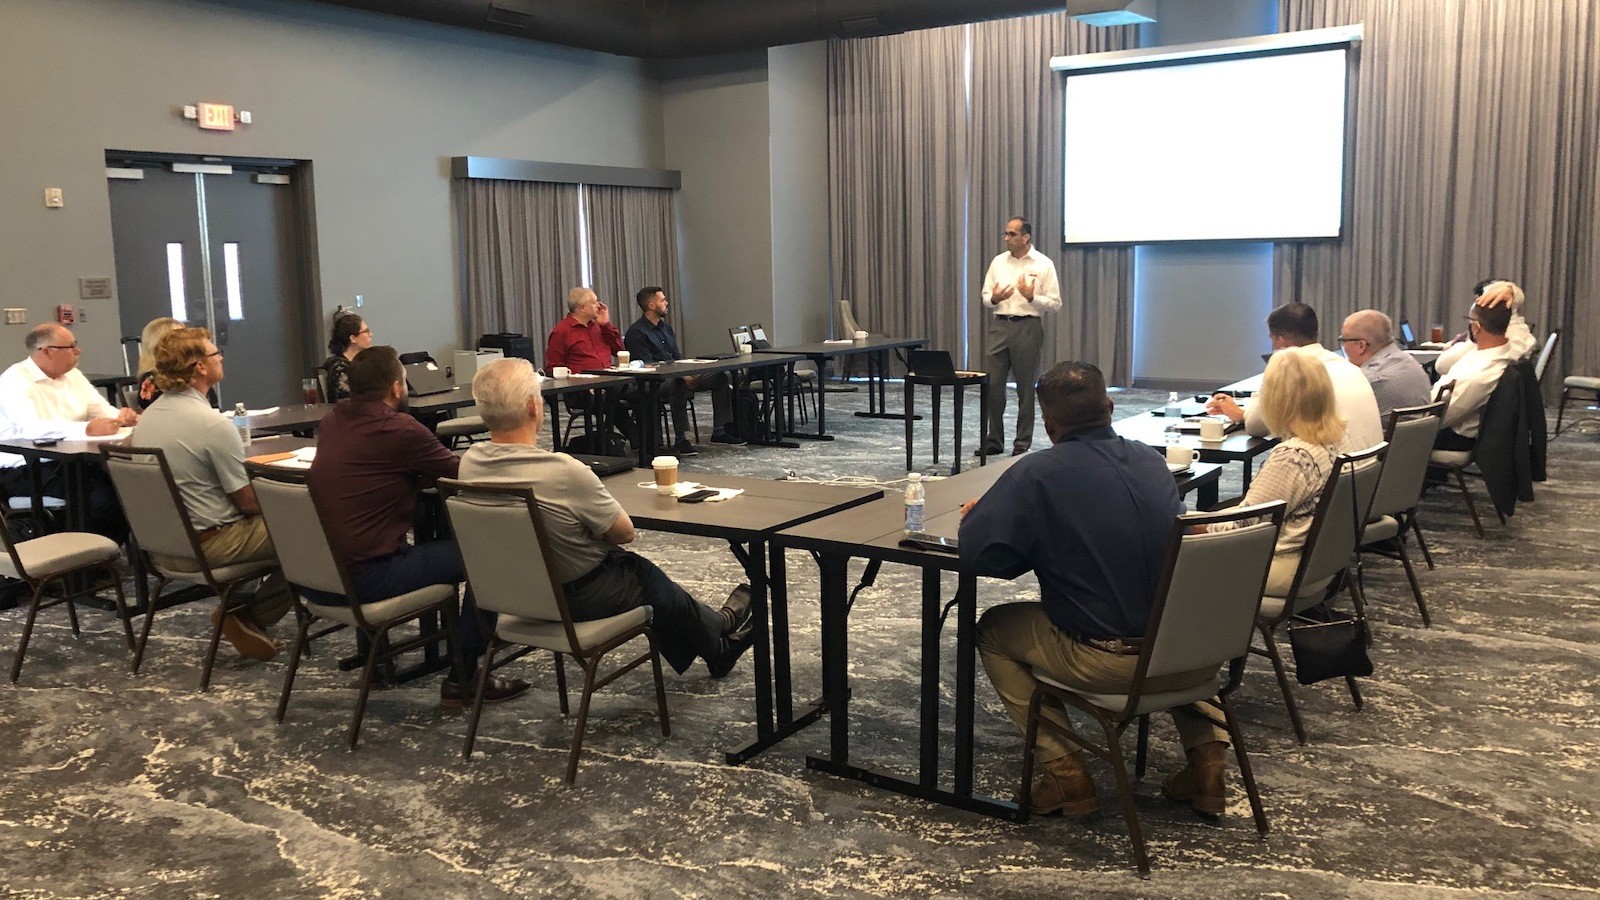 AMTS leadership team meeting in August 2020 discussing high-tech construction project delivery during COVID-19 environment by AMTS in houston, texas. 